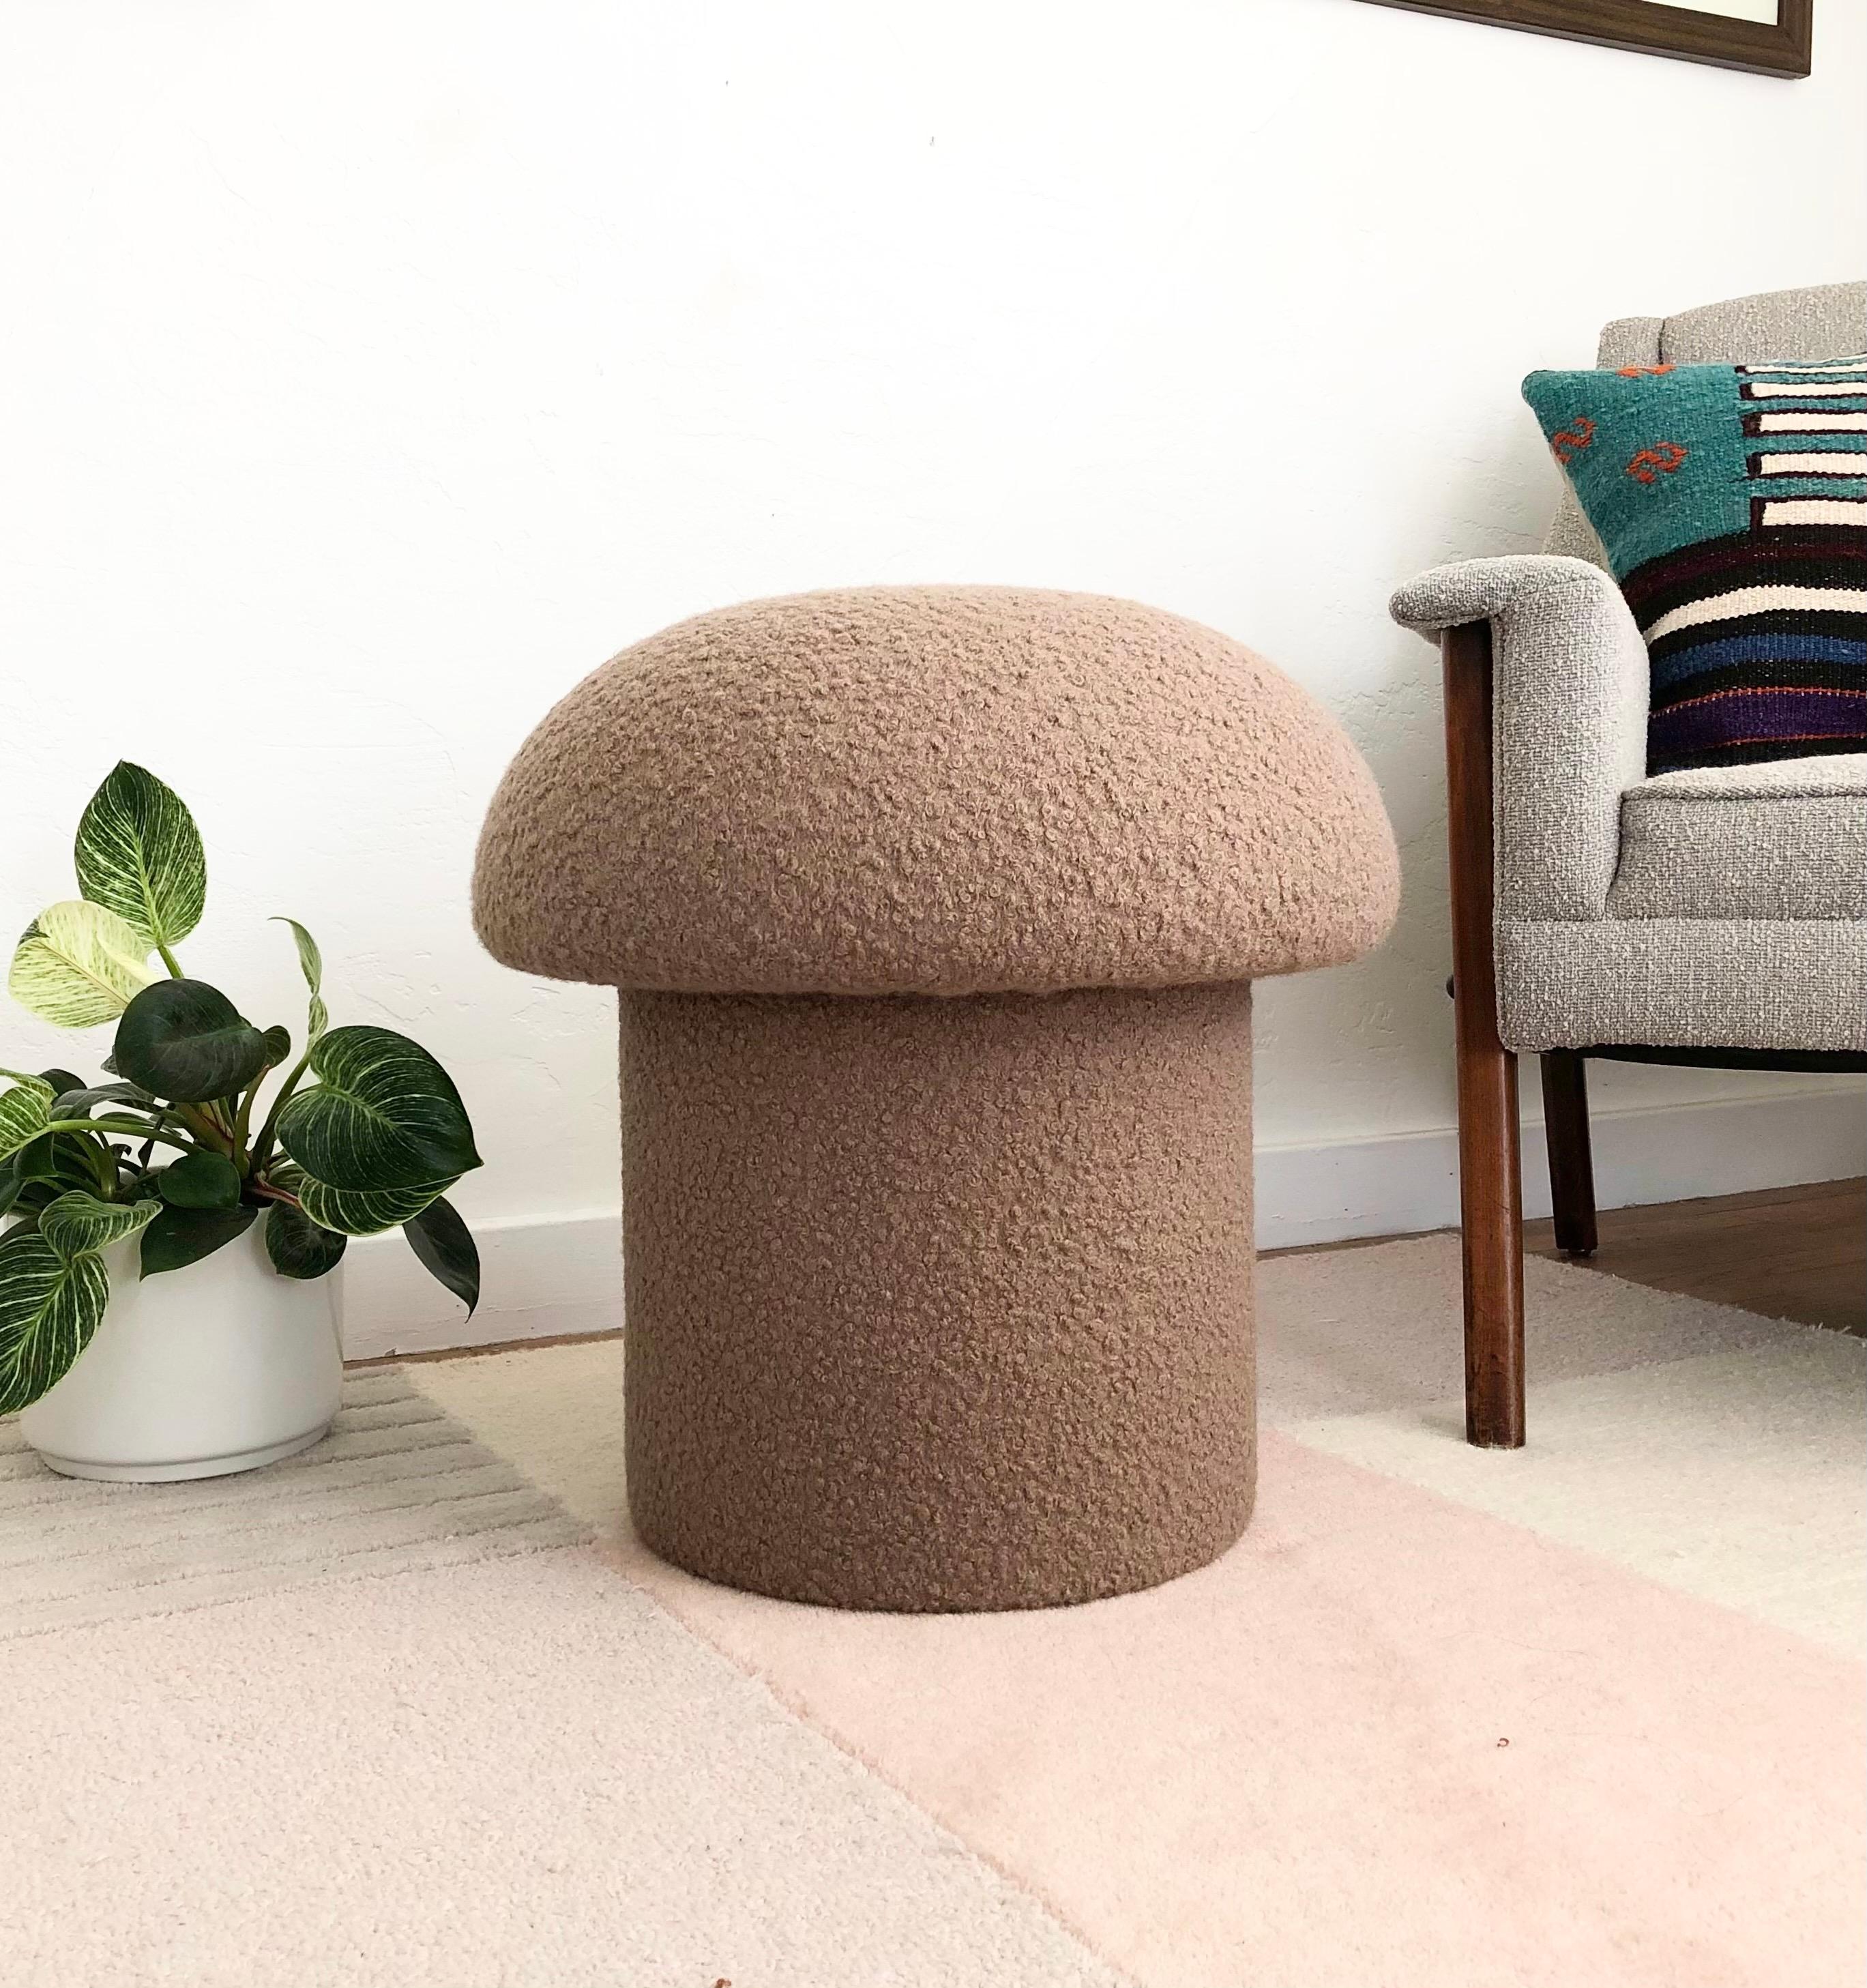 A handmade mushroom shaped ottoman, upholstered in a taupe colored curly boucle fabric. Perfect for using as a footstool or extra occasional seating. A comfortable cushioned seat and sculptural accent piece.
Mushroom ottomans are made to order,